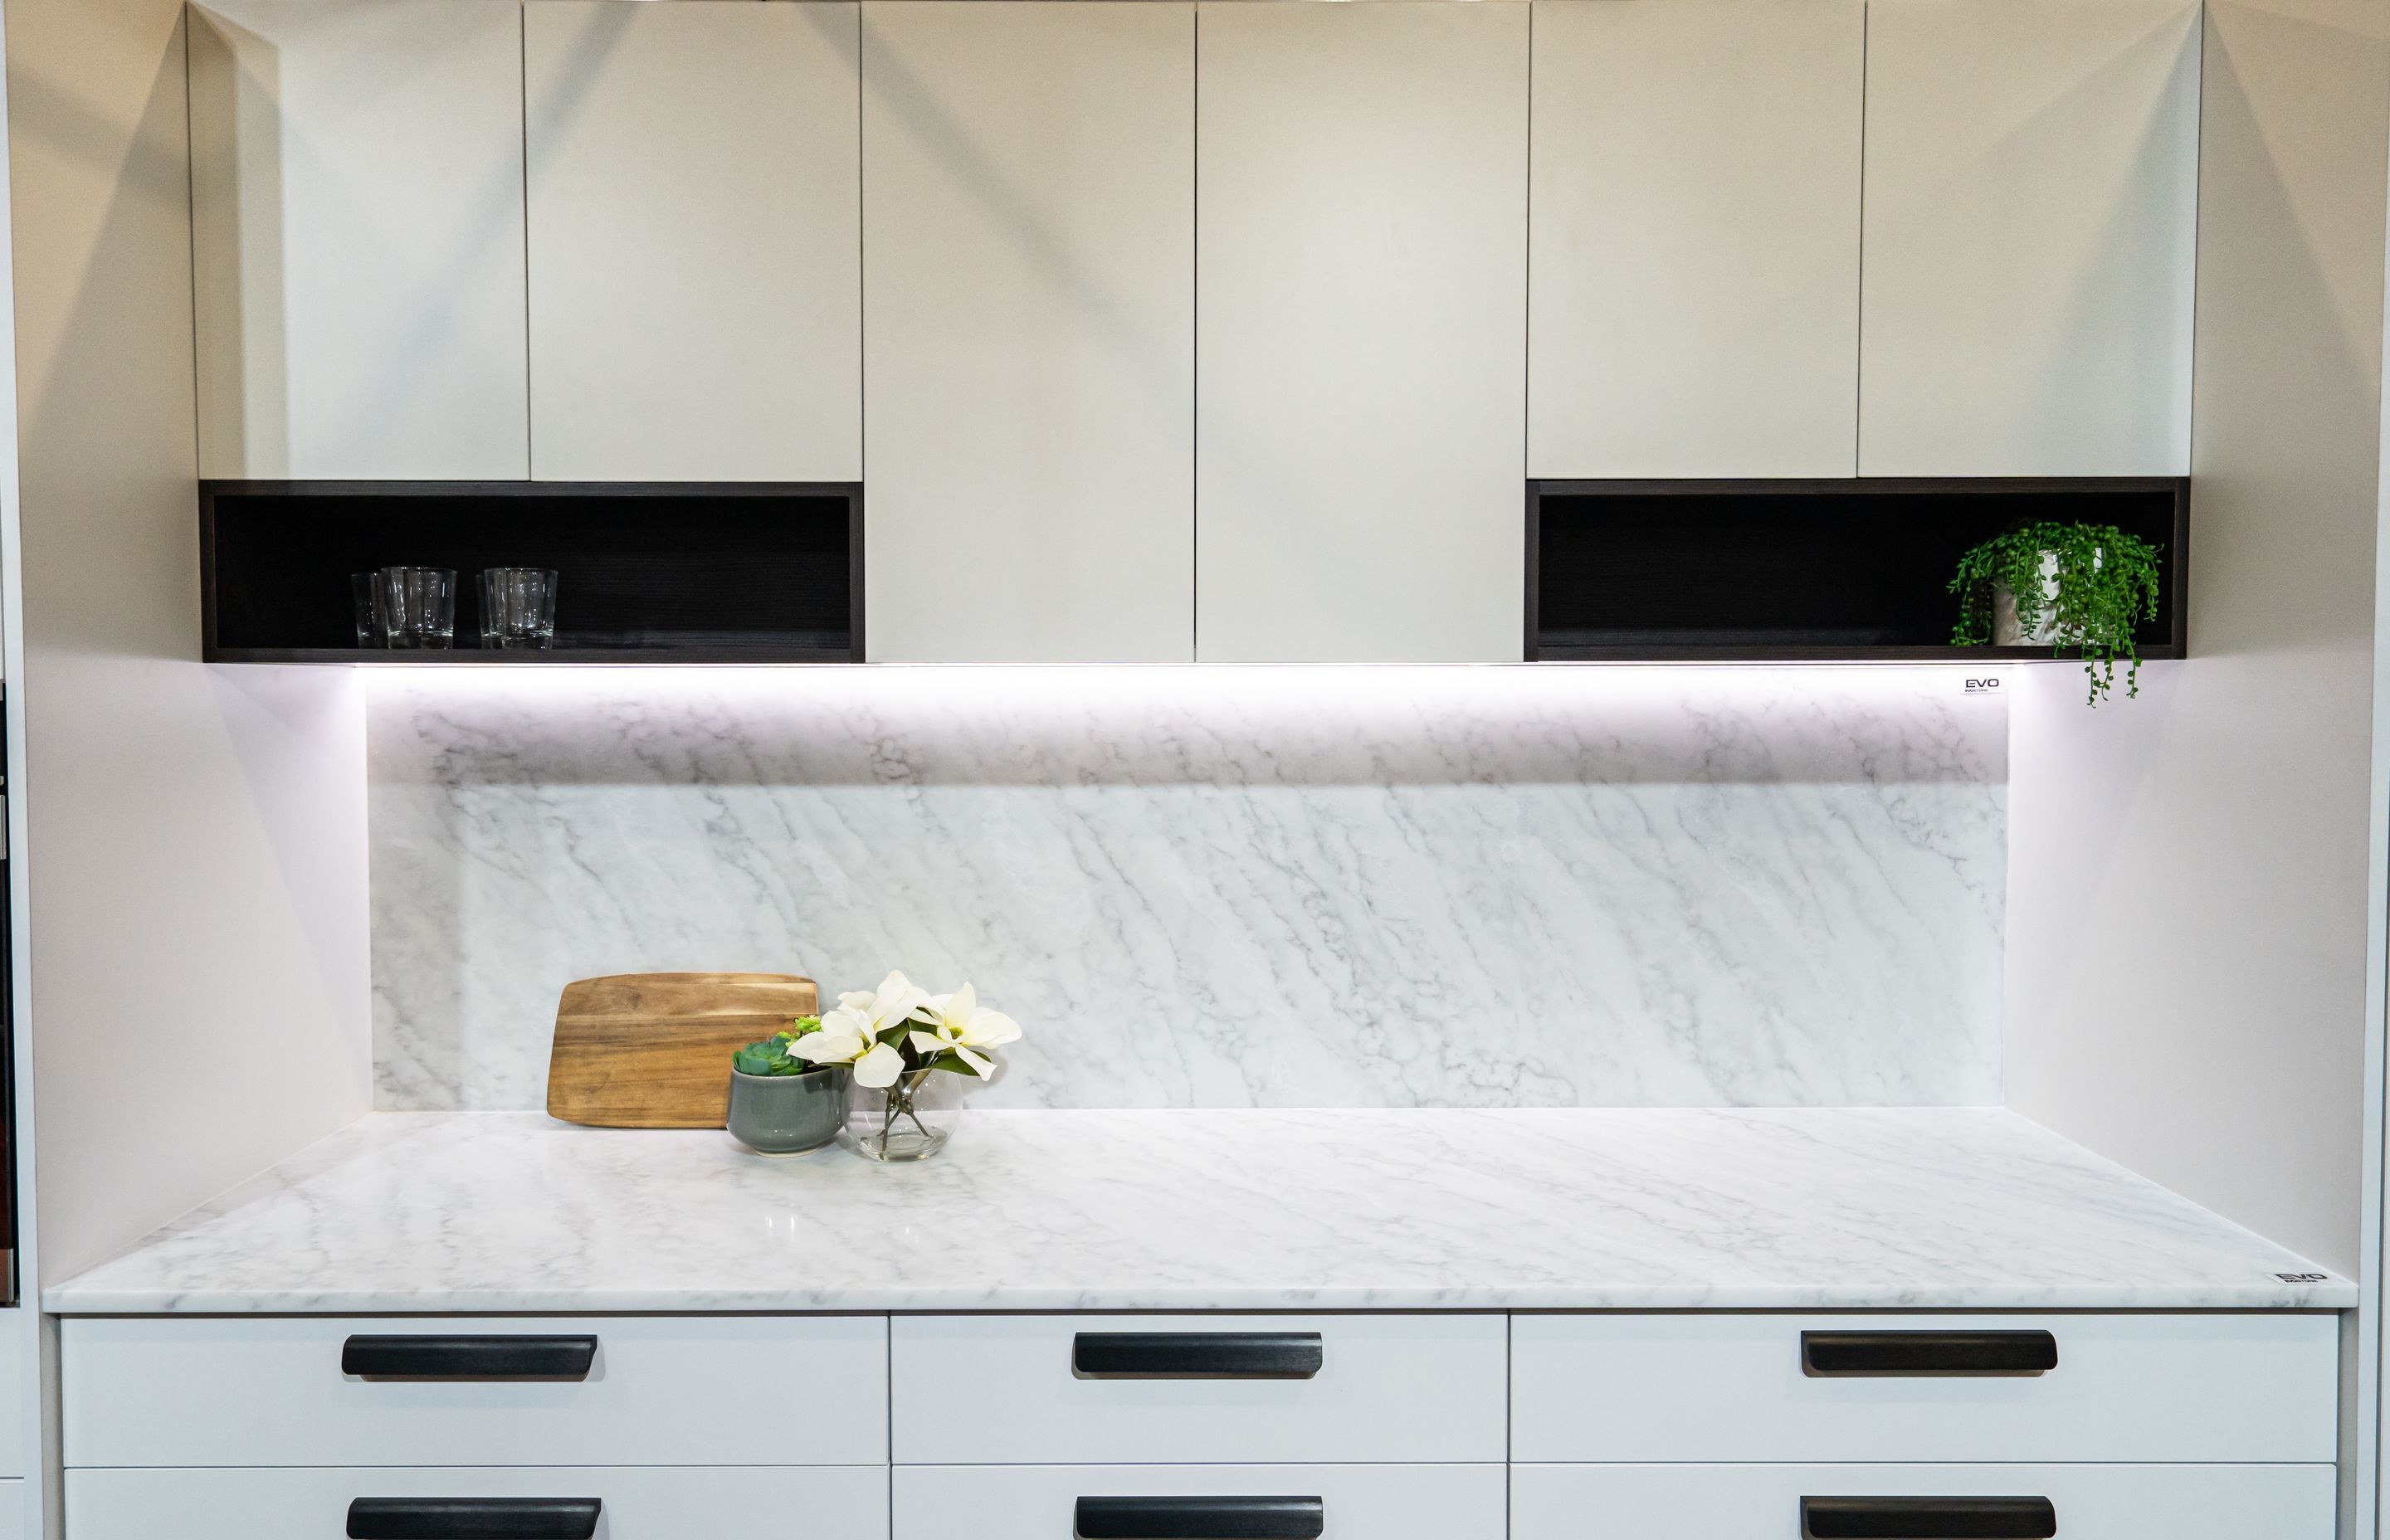 Evostone Elements in Lunar was used as the benchtop and splashback, combined with the black &amp; white colour design tied in all the elements.